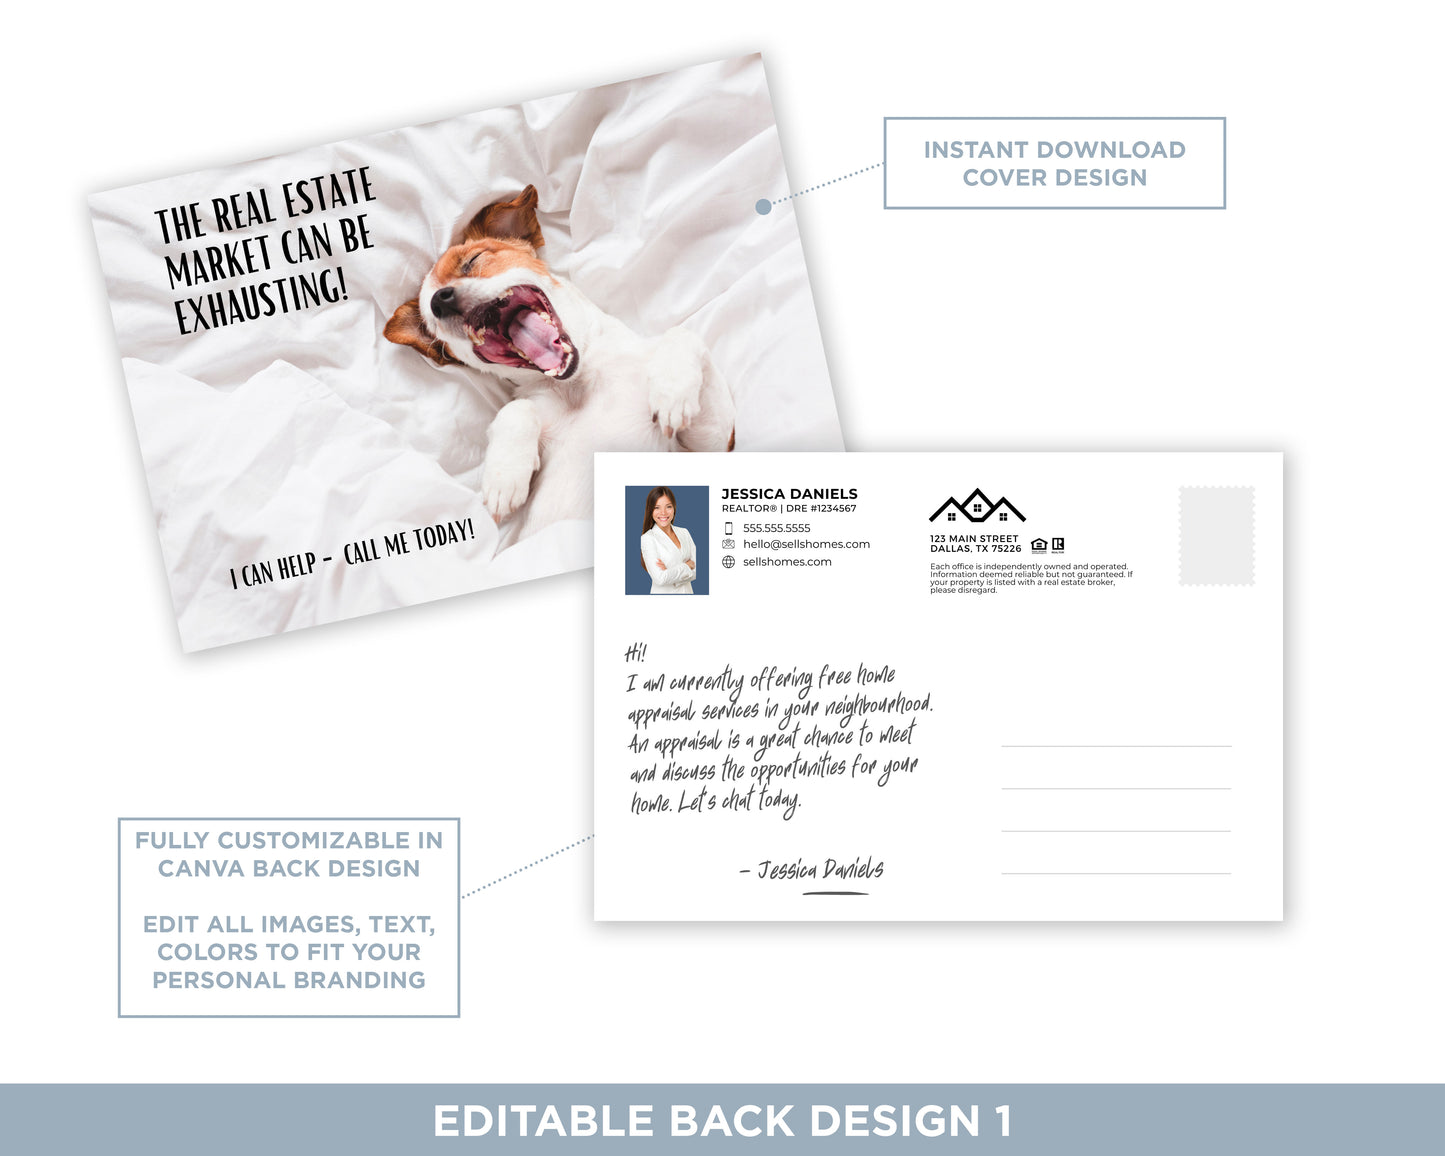 Real Estate Market Can Be Exhausting | Funny Real Estate Postcard Download